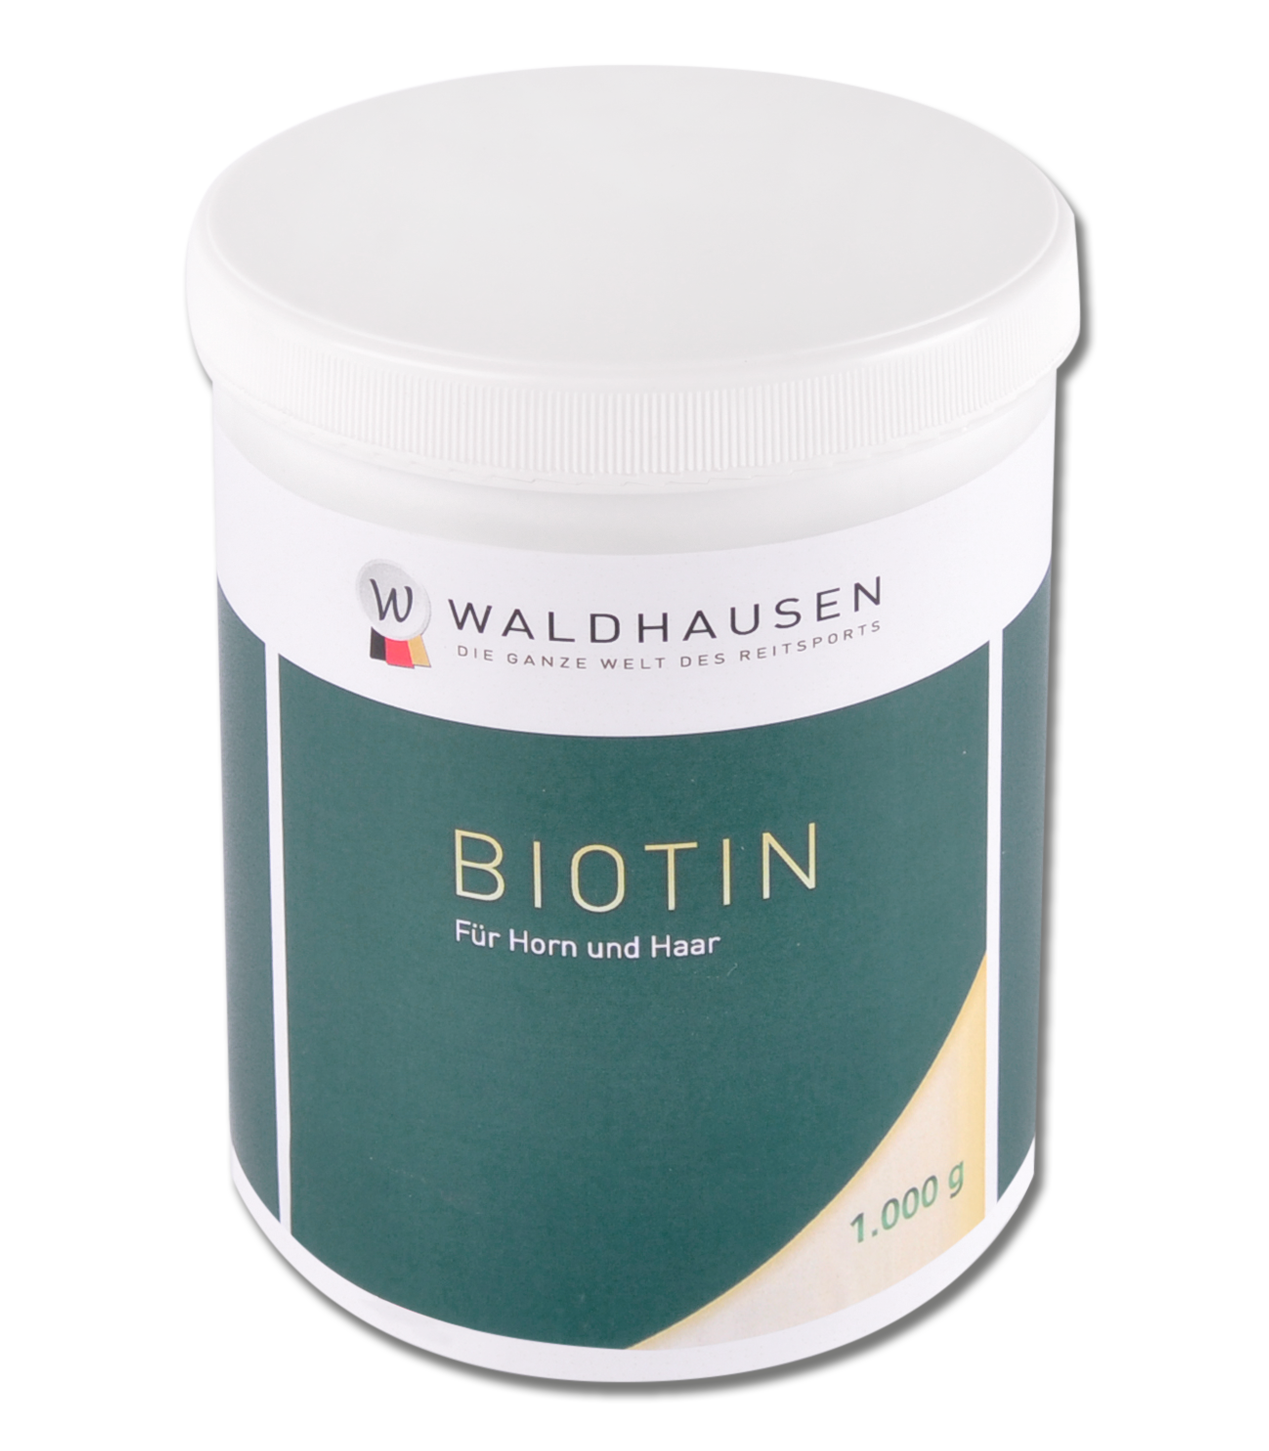 Biotin - for horn and hair, 1 kg